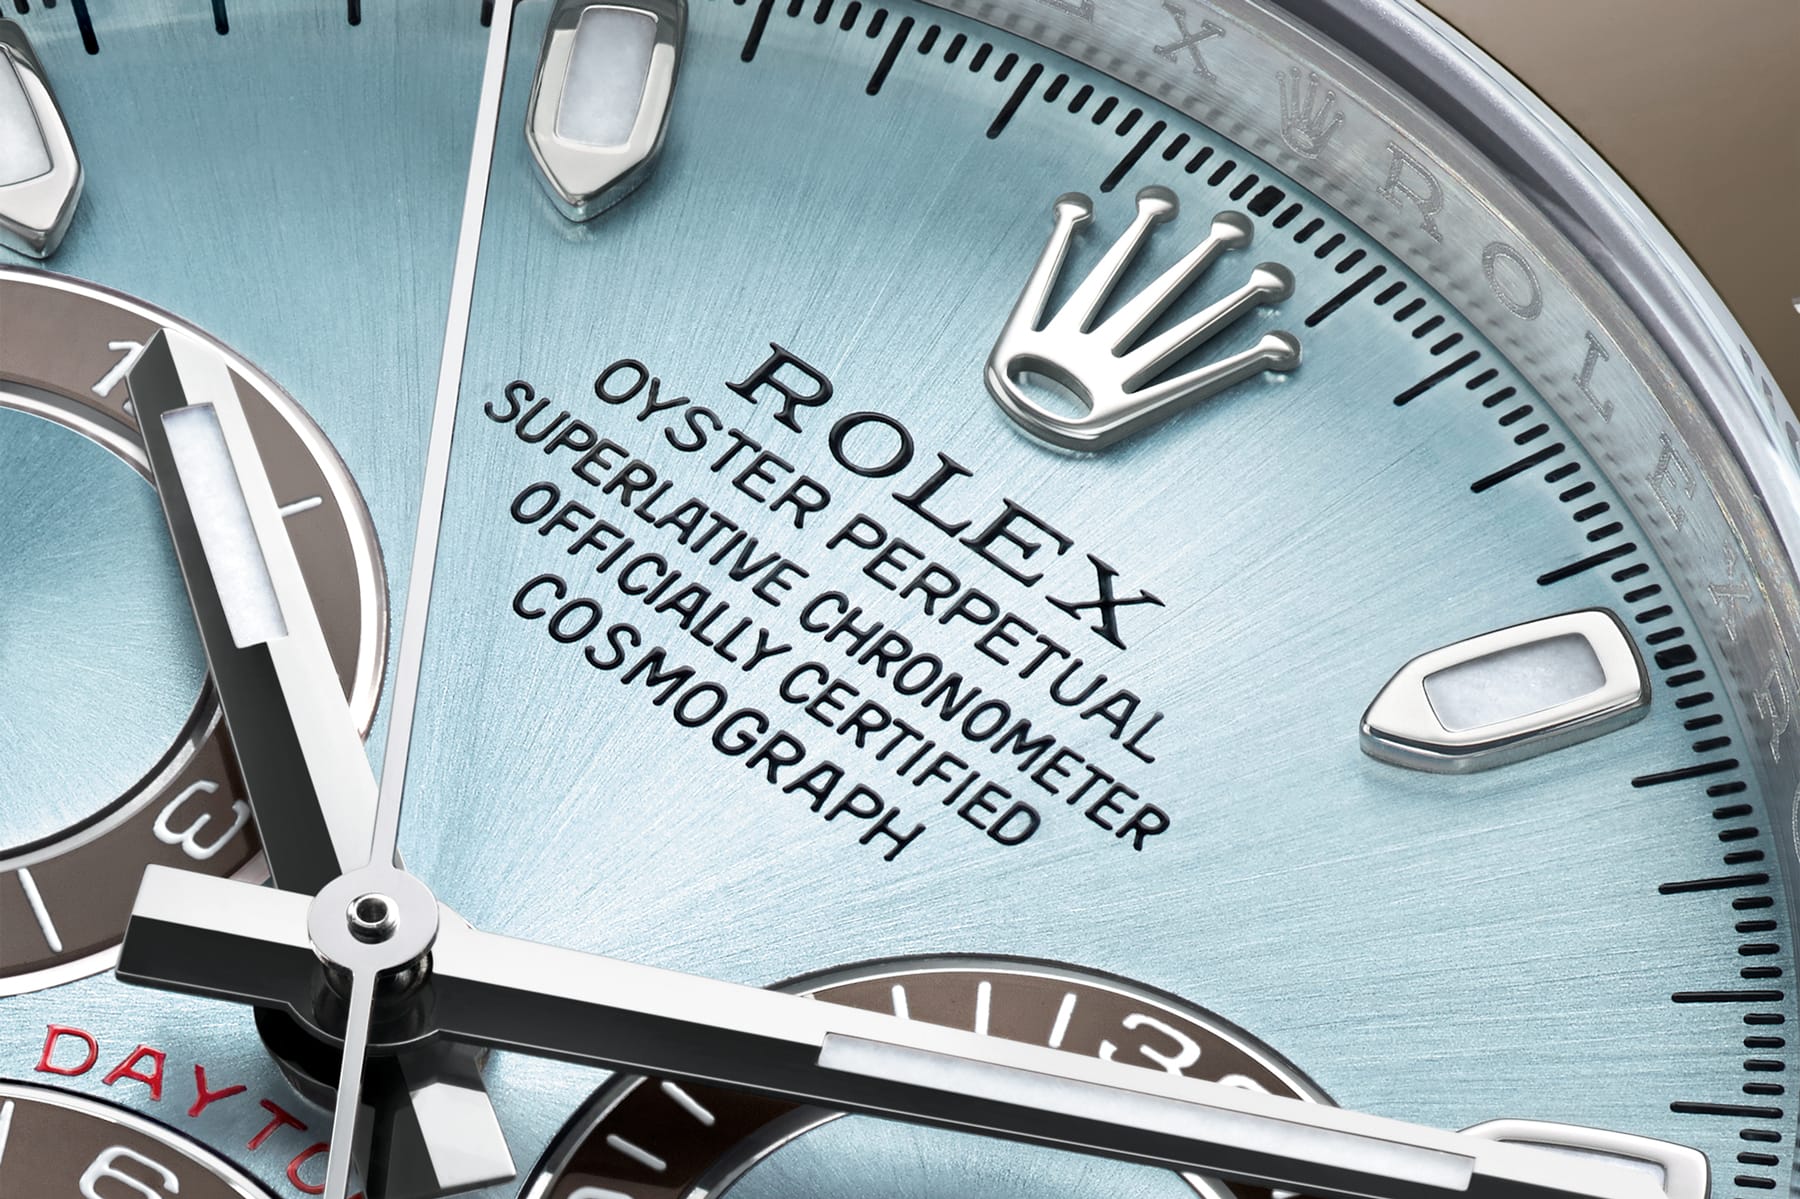 rolex watches oyster perpetual superlative chronometer officially certified cosmograph